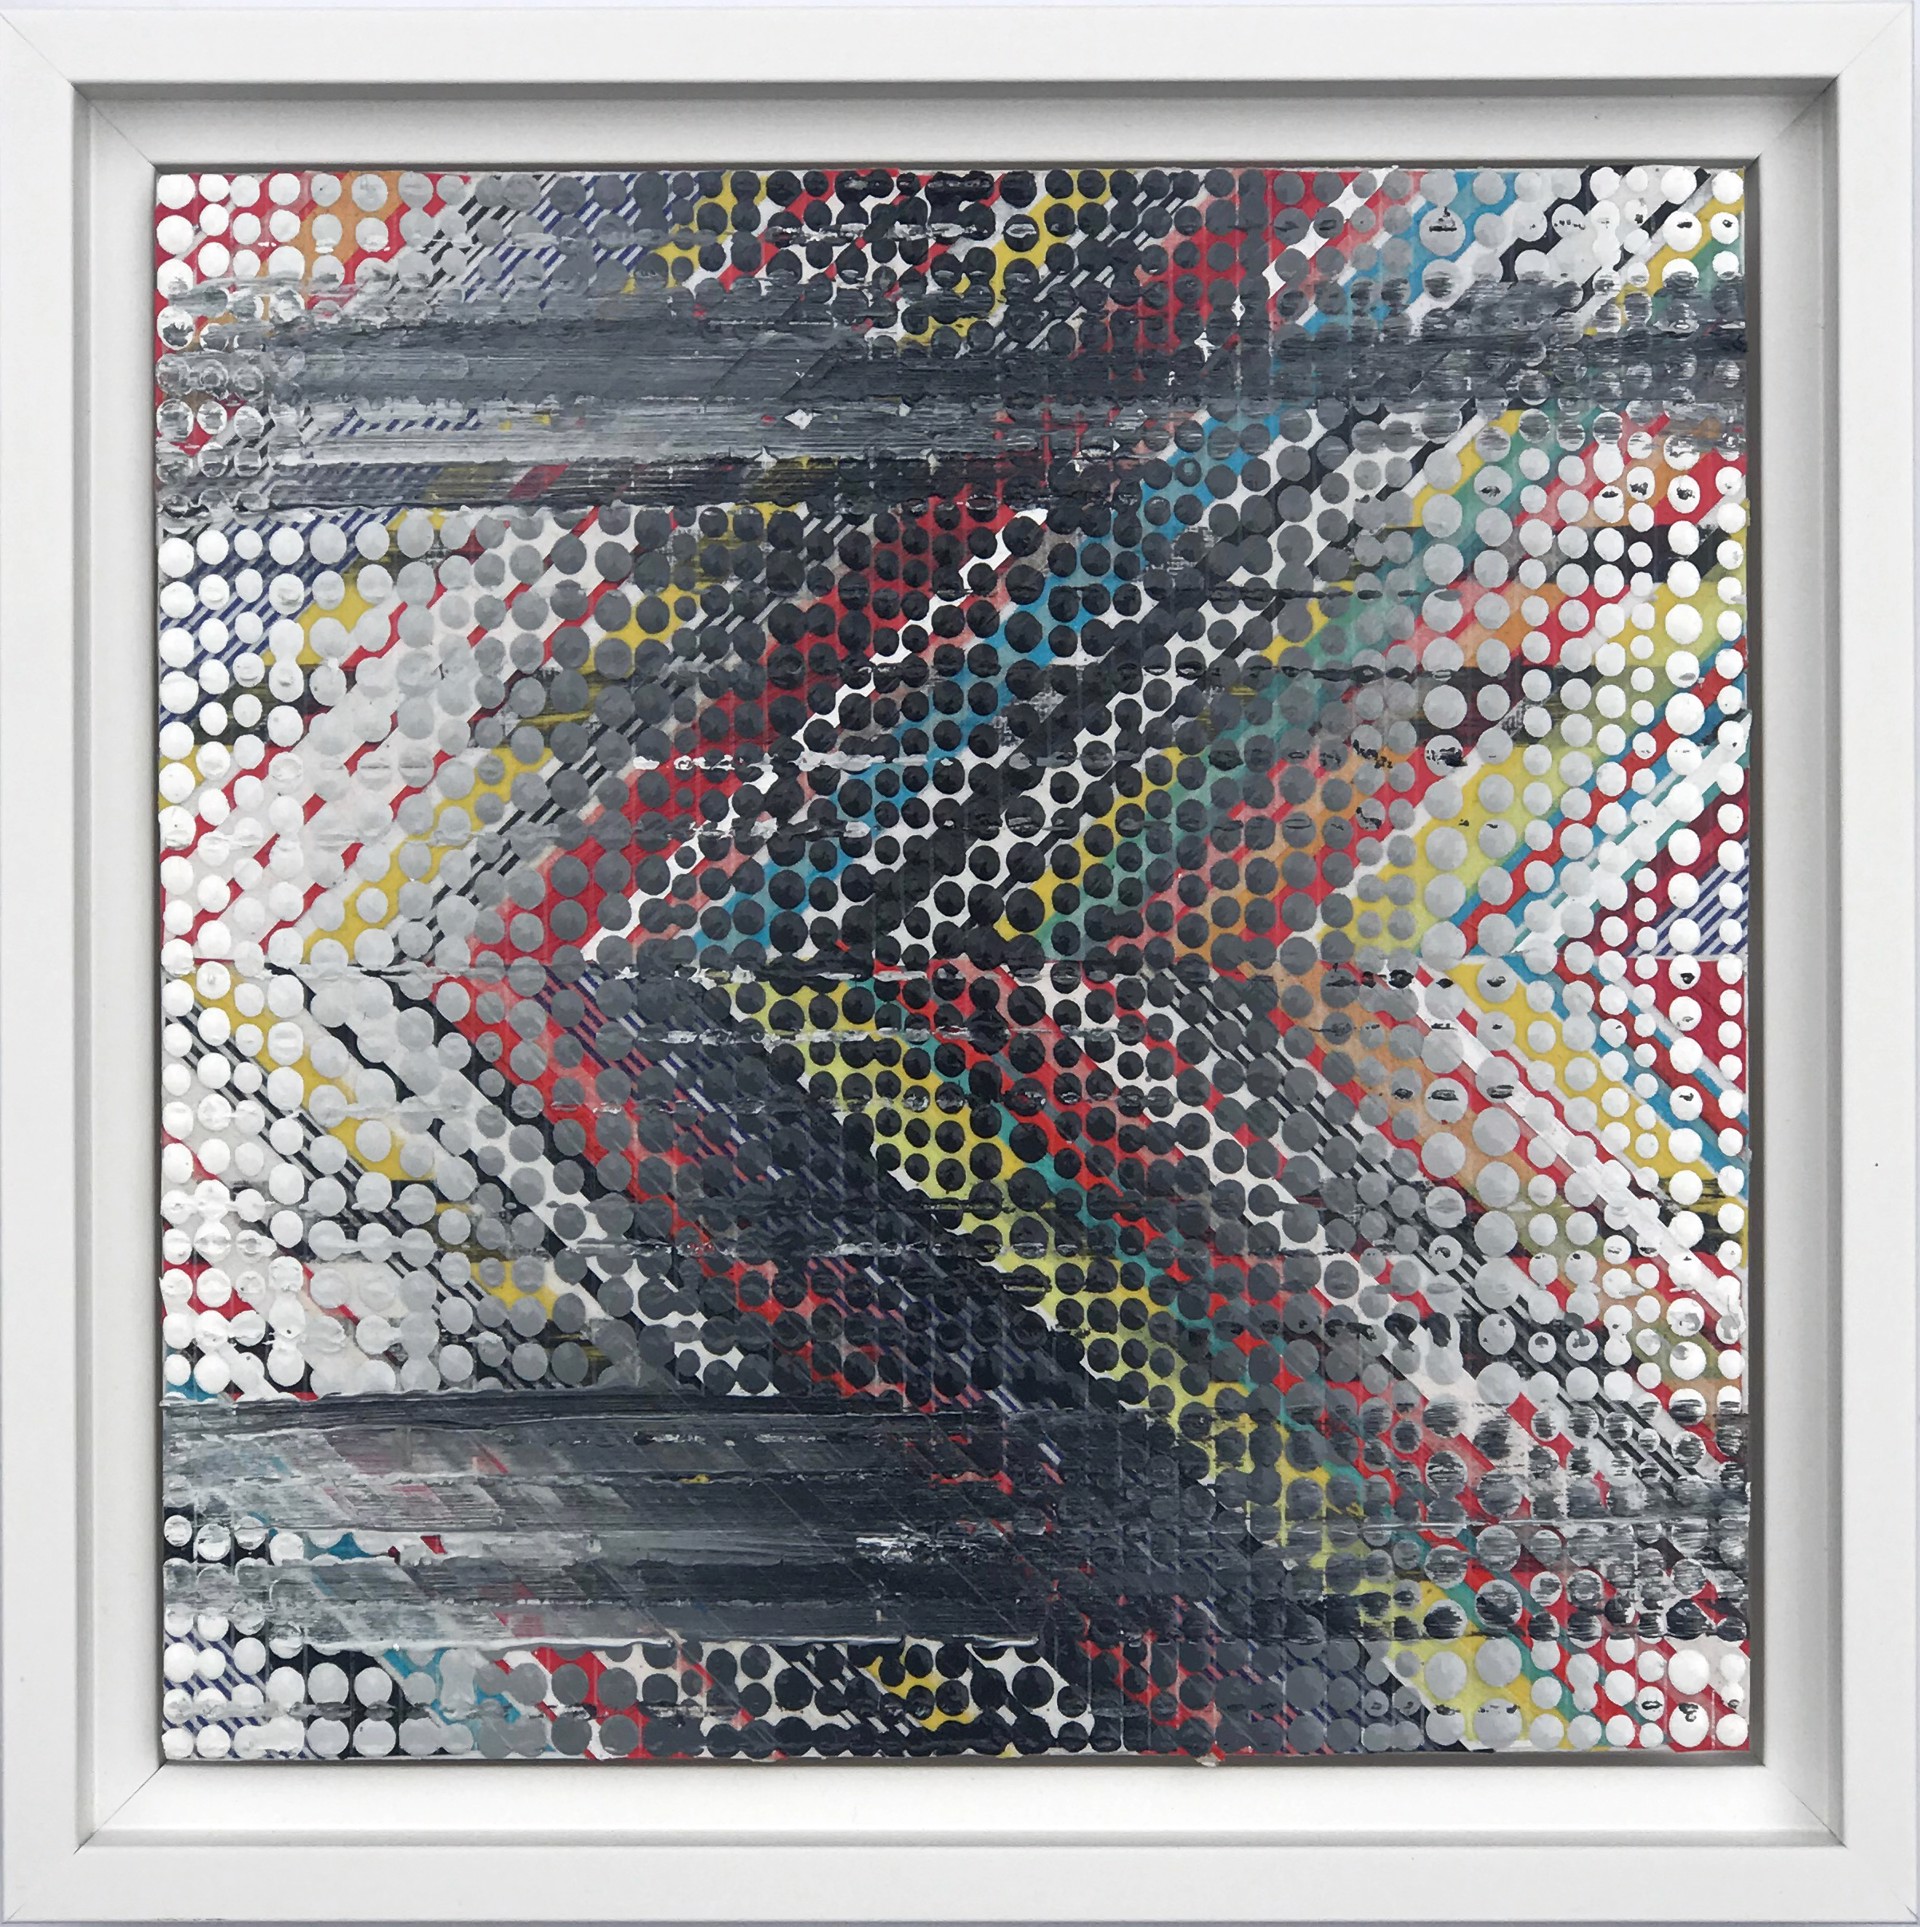 Abstract Colorful Painting Made Up Of Dots Forming A Chevron With Primarily Black, White, Red And Yellow, By Nina Tichava